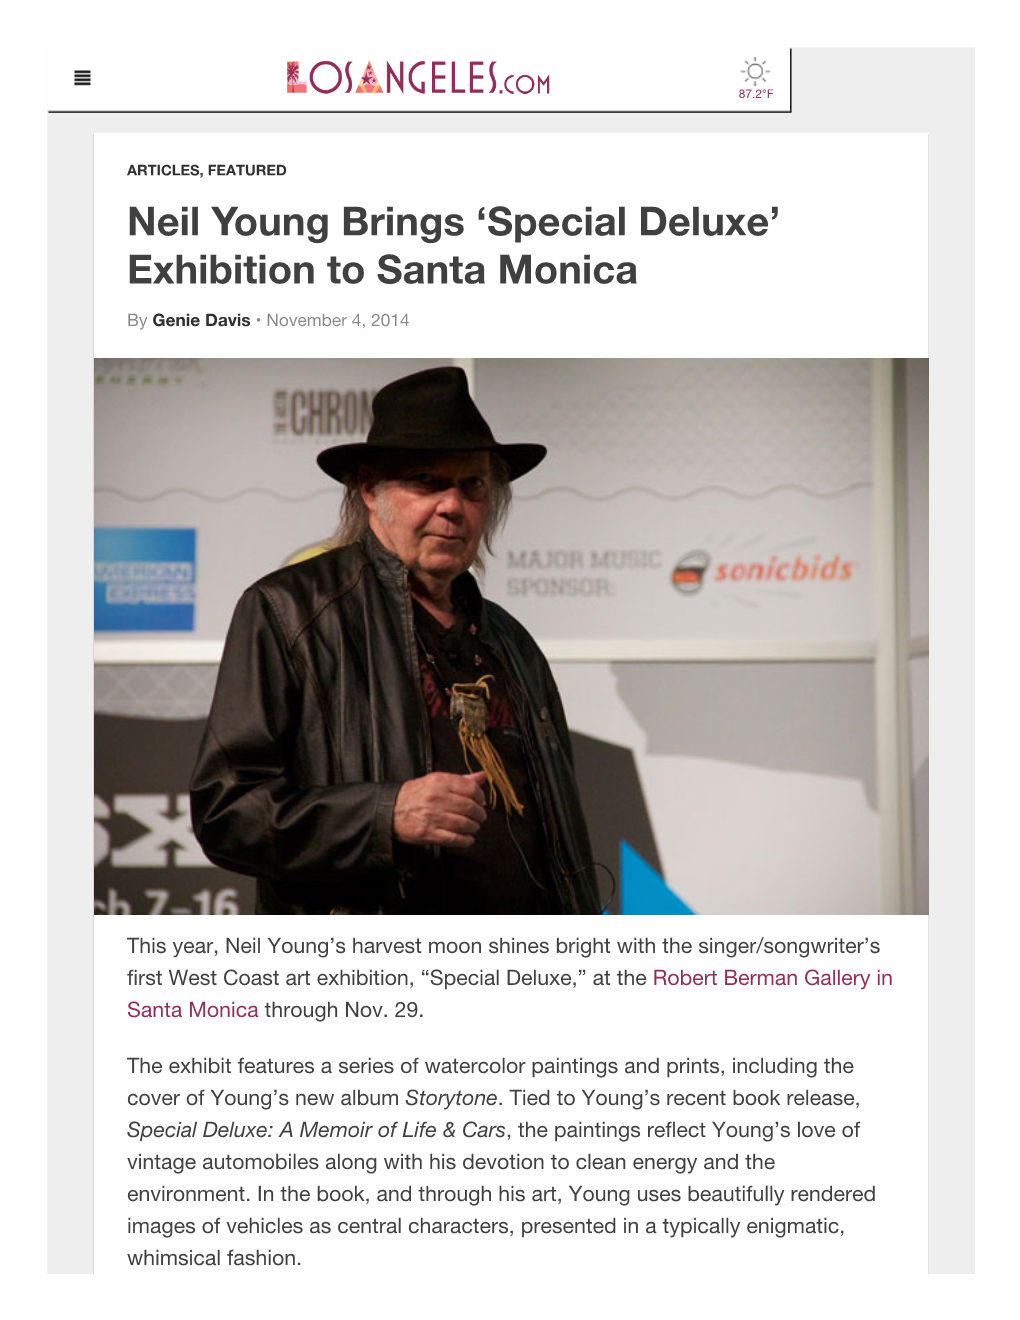 Neil Young Brings 'Special Deluxe' Exhibition to Santa Monica